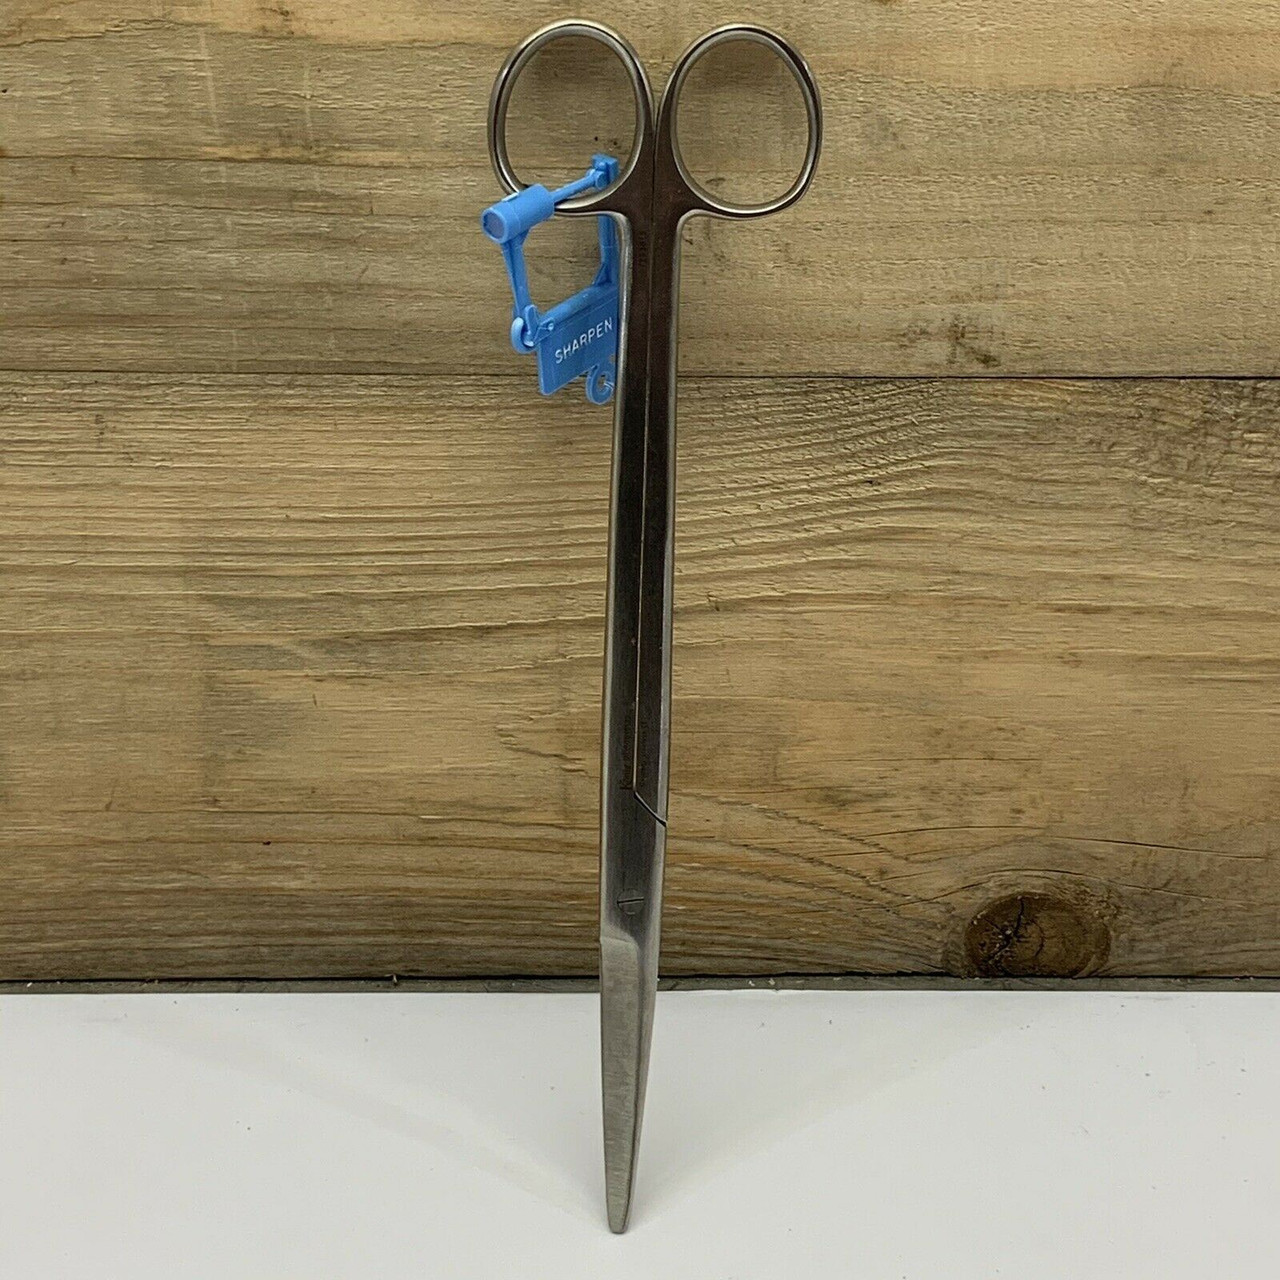 Mayo Dissecting Scissors MDS0816123 Medline 9" Curved Blunt Tip